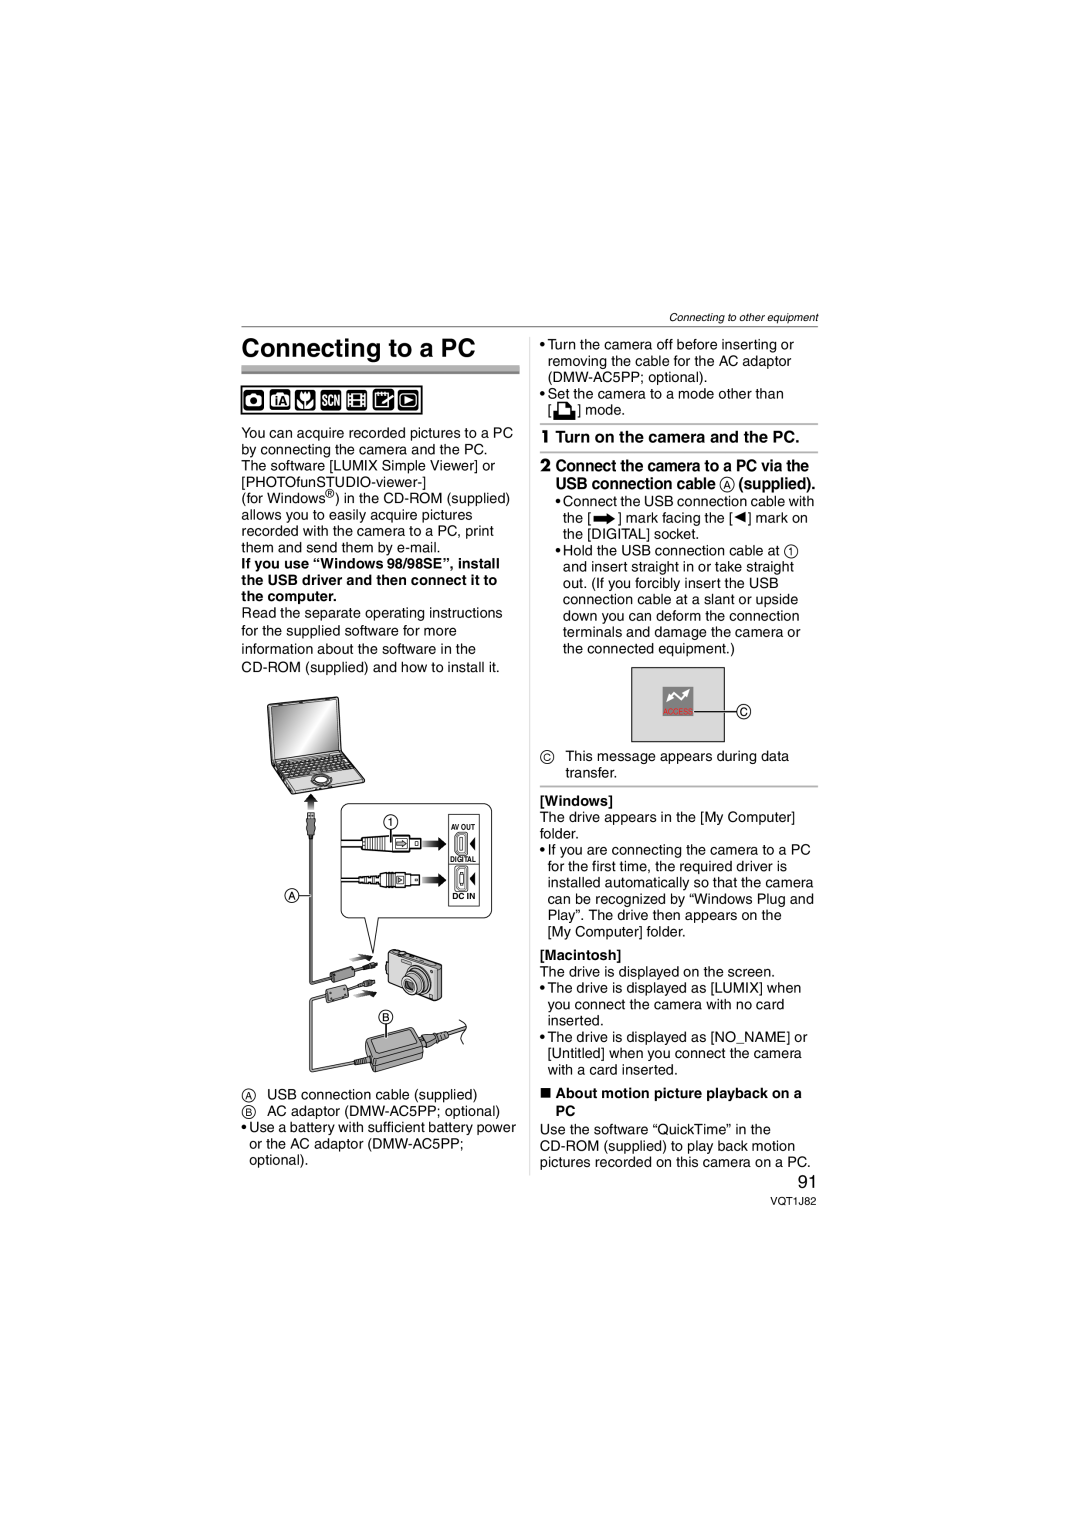 Panasonic DMC-FX33 operating instructions Connecting to a PC, Turn on the camera and the PC, Windows, Macintosh 